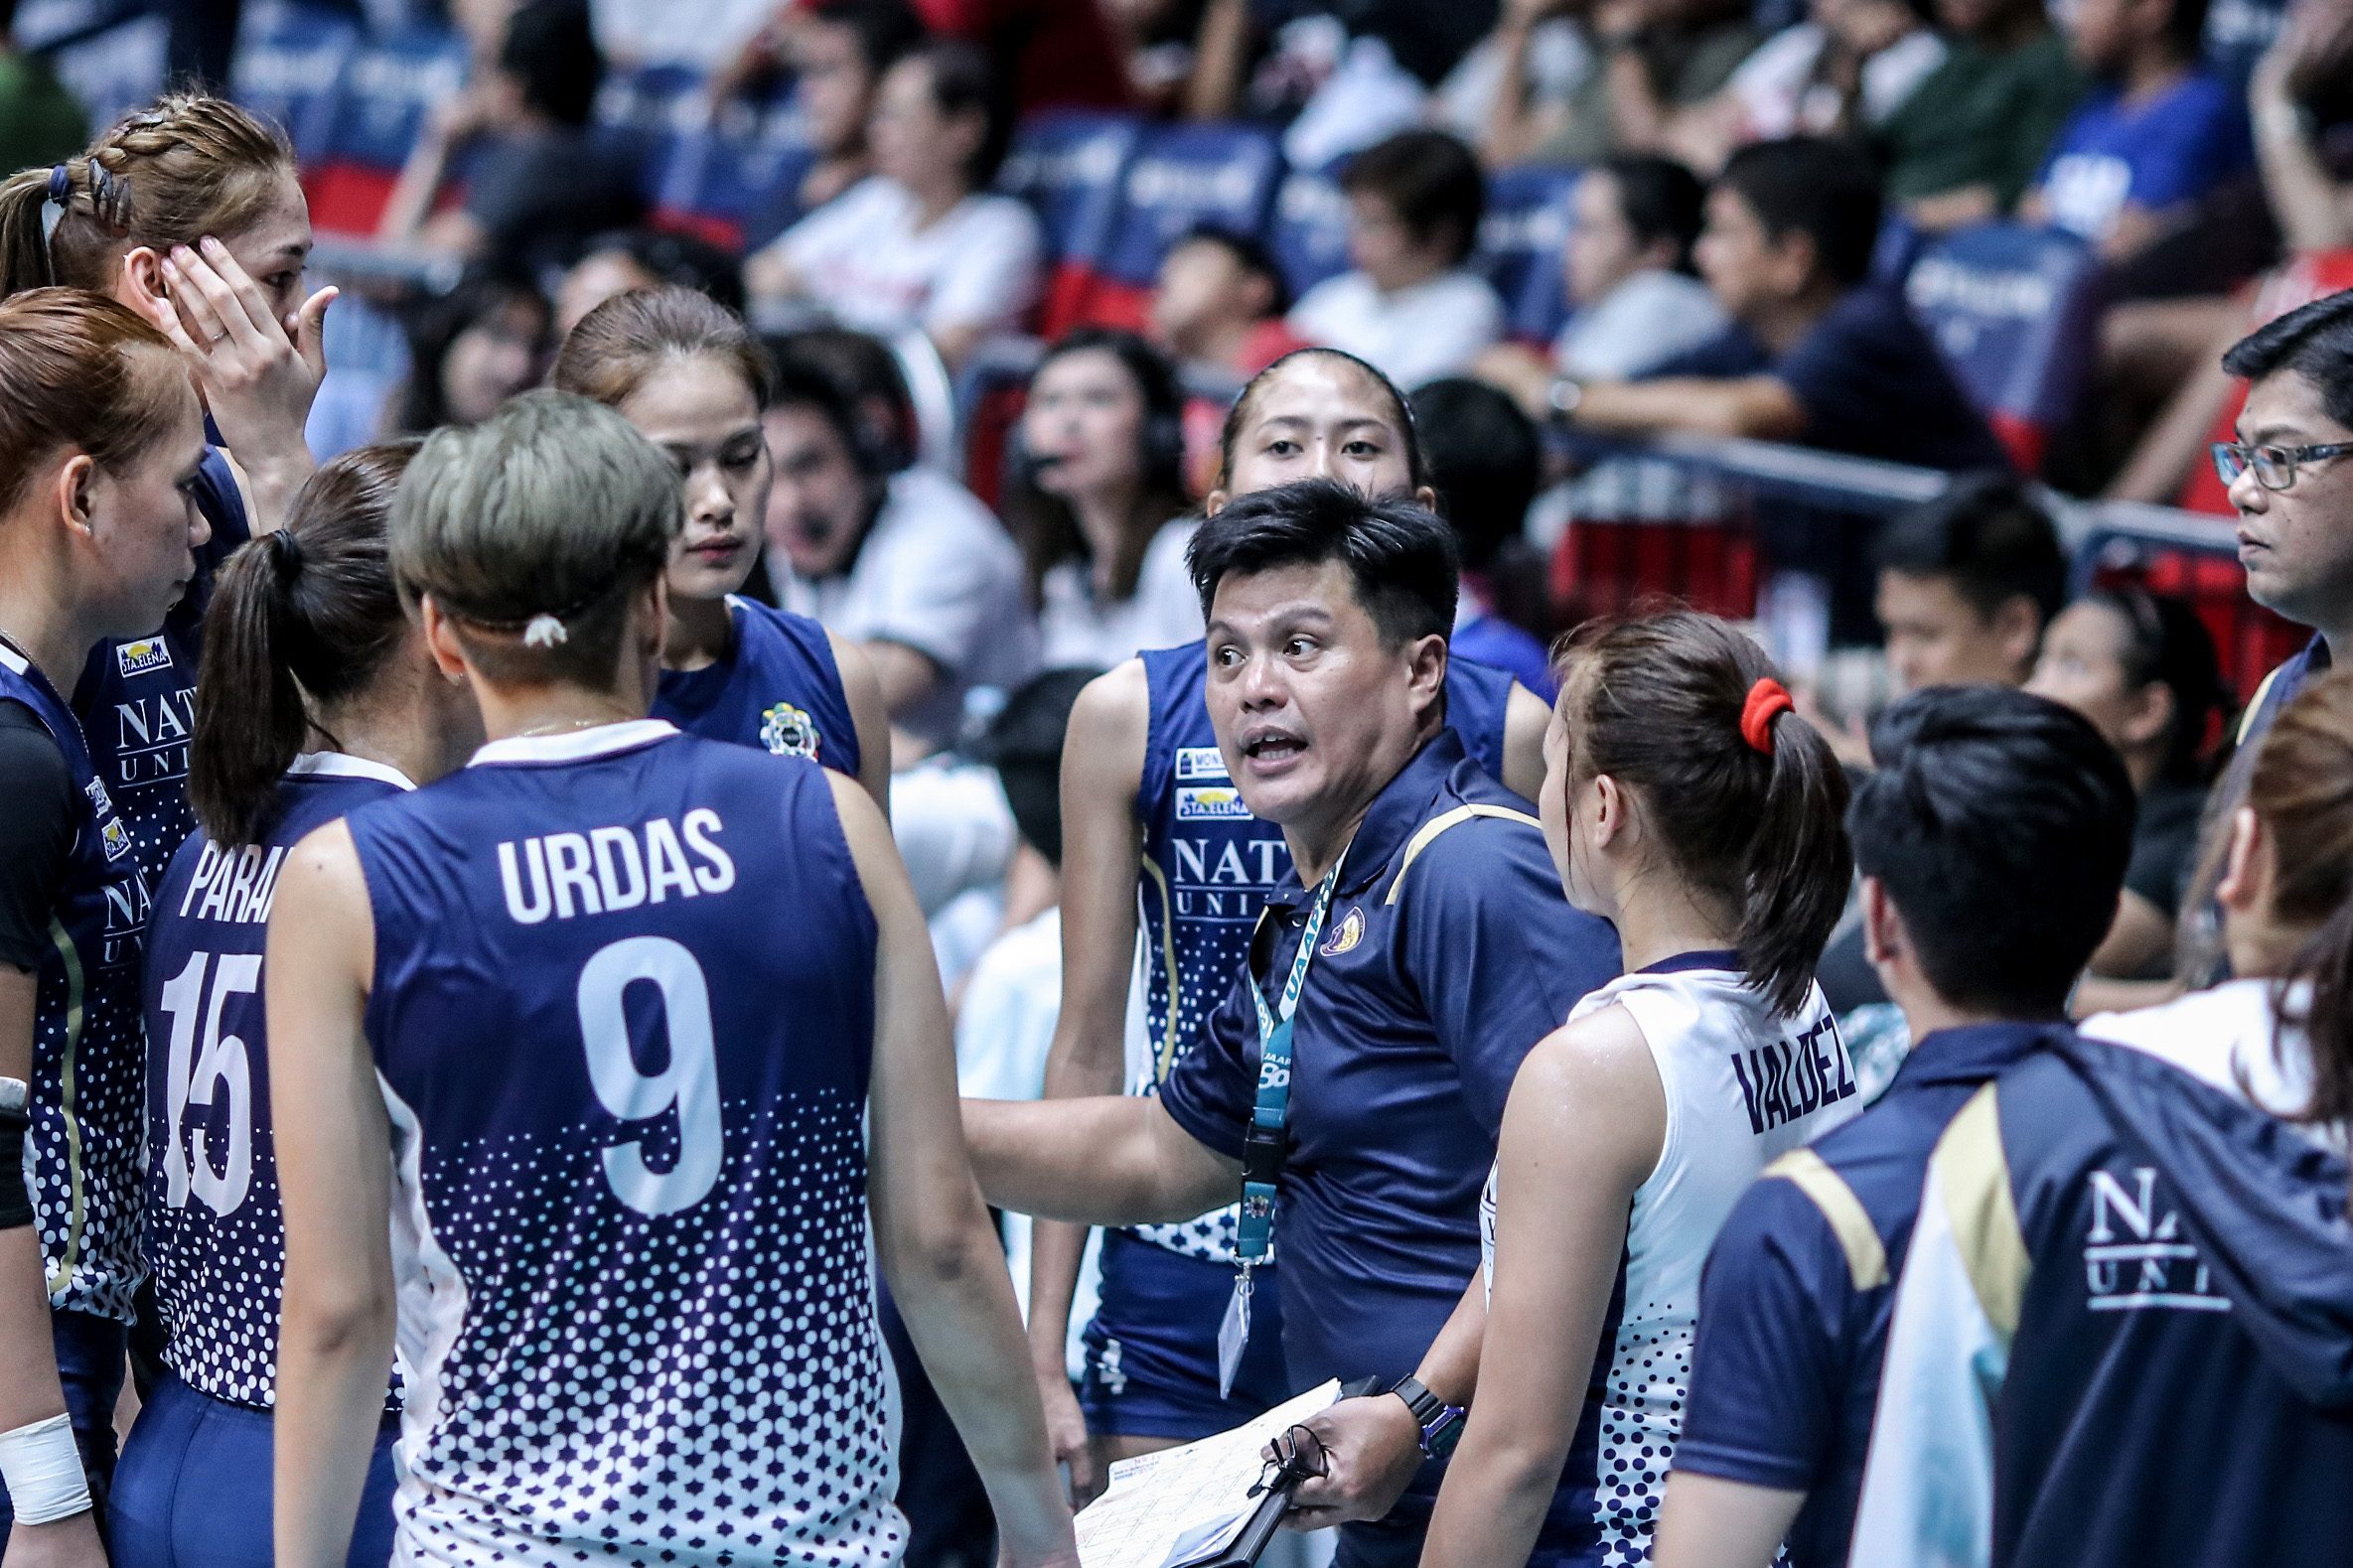 ‘Ghost of the past’ haunts NU Lady Bulldogs, says Castillo